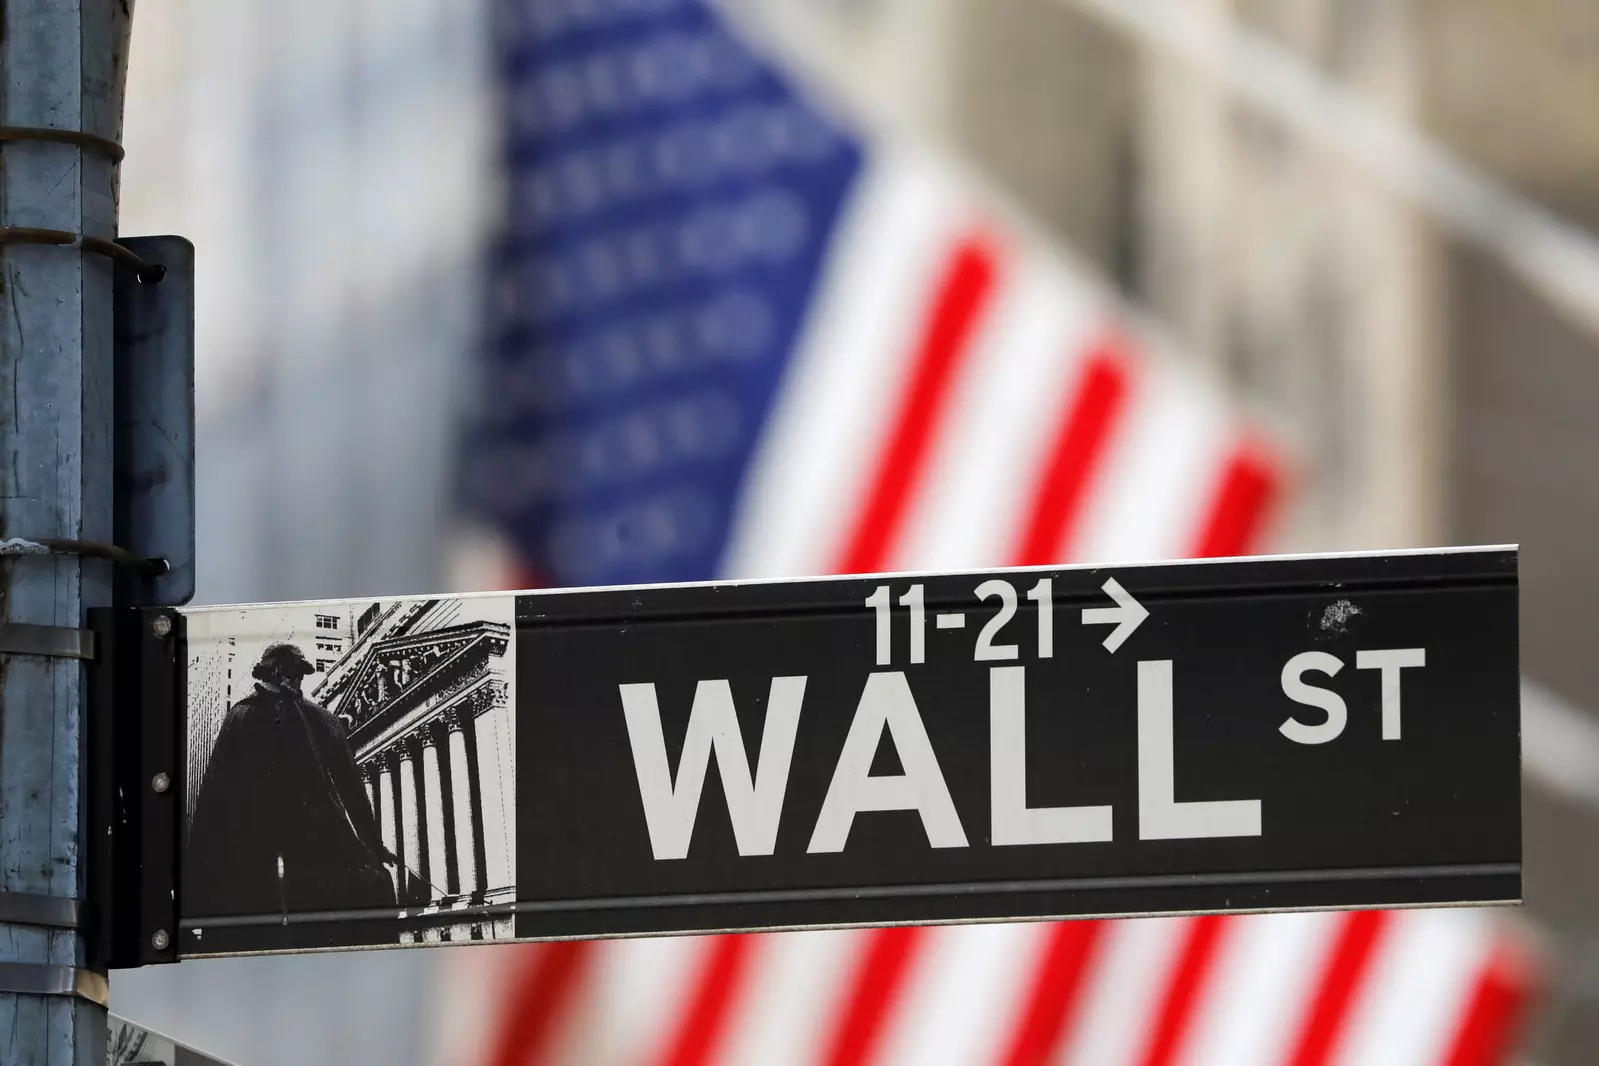 Wall St Week Ahead: Investors lower outlook on declining consumer confidence